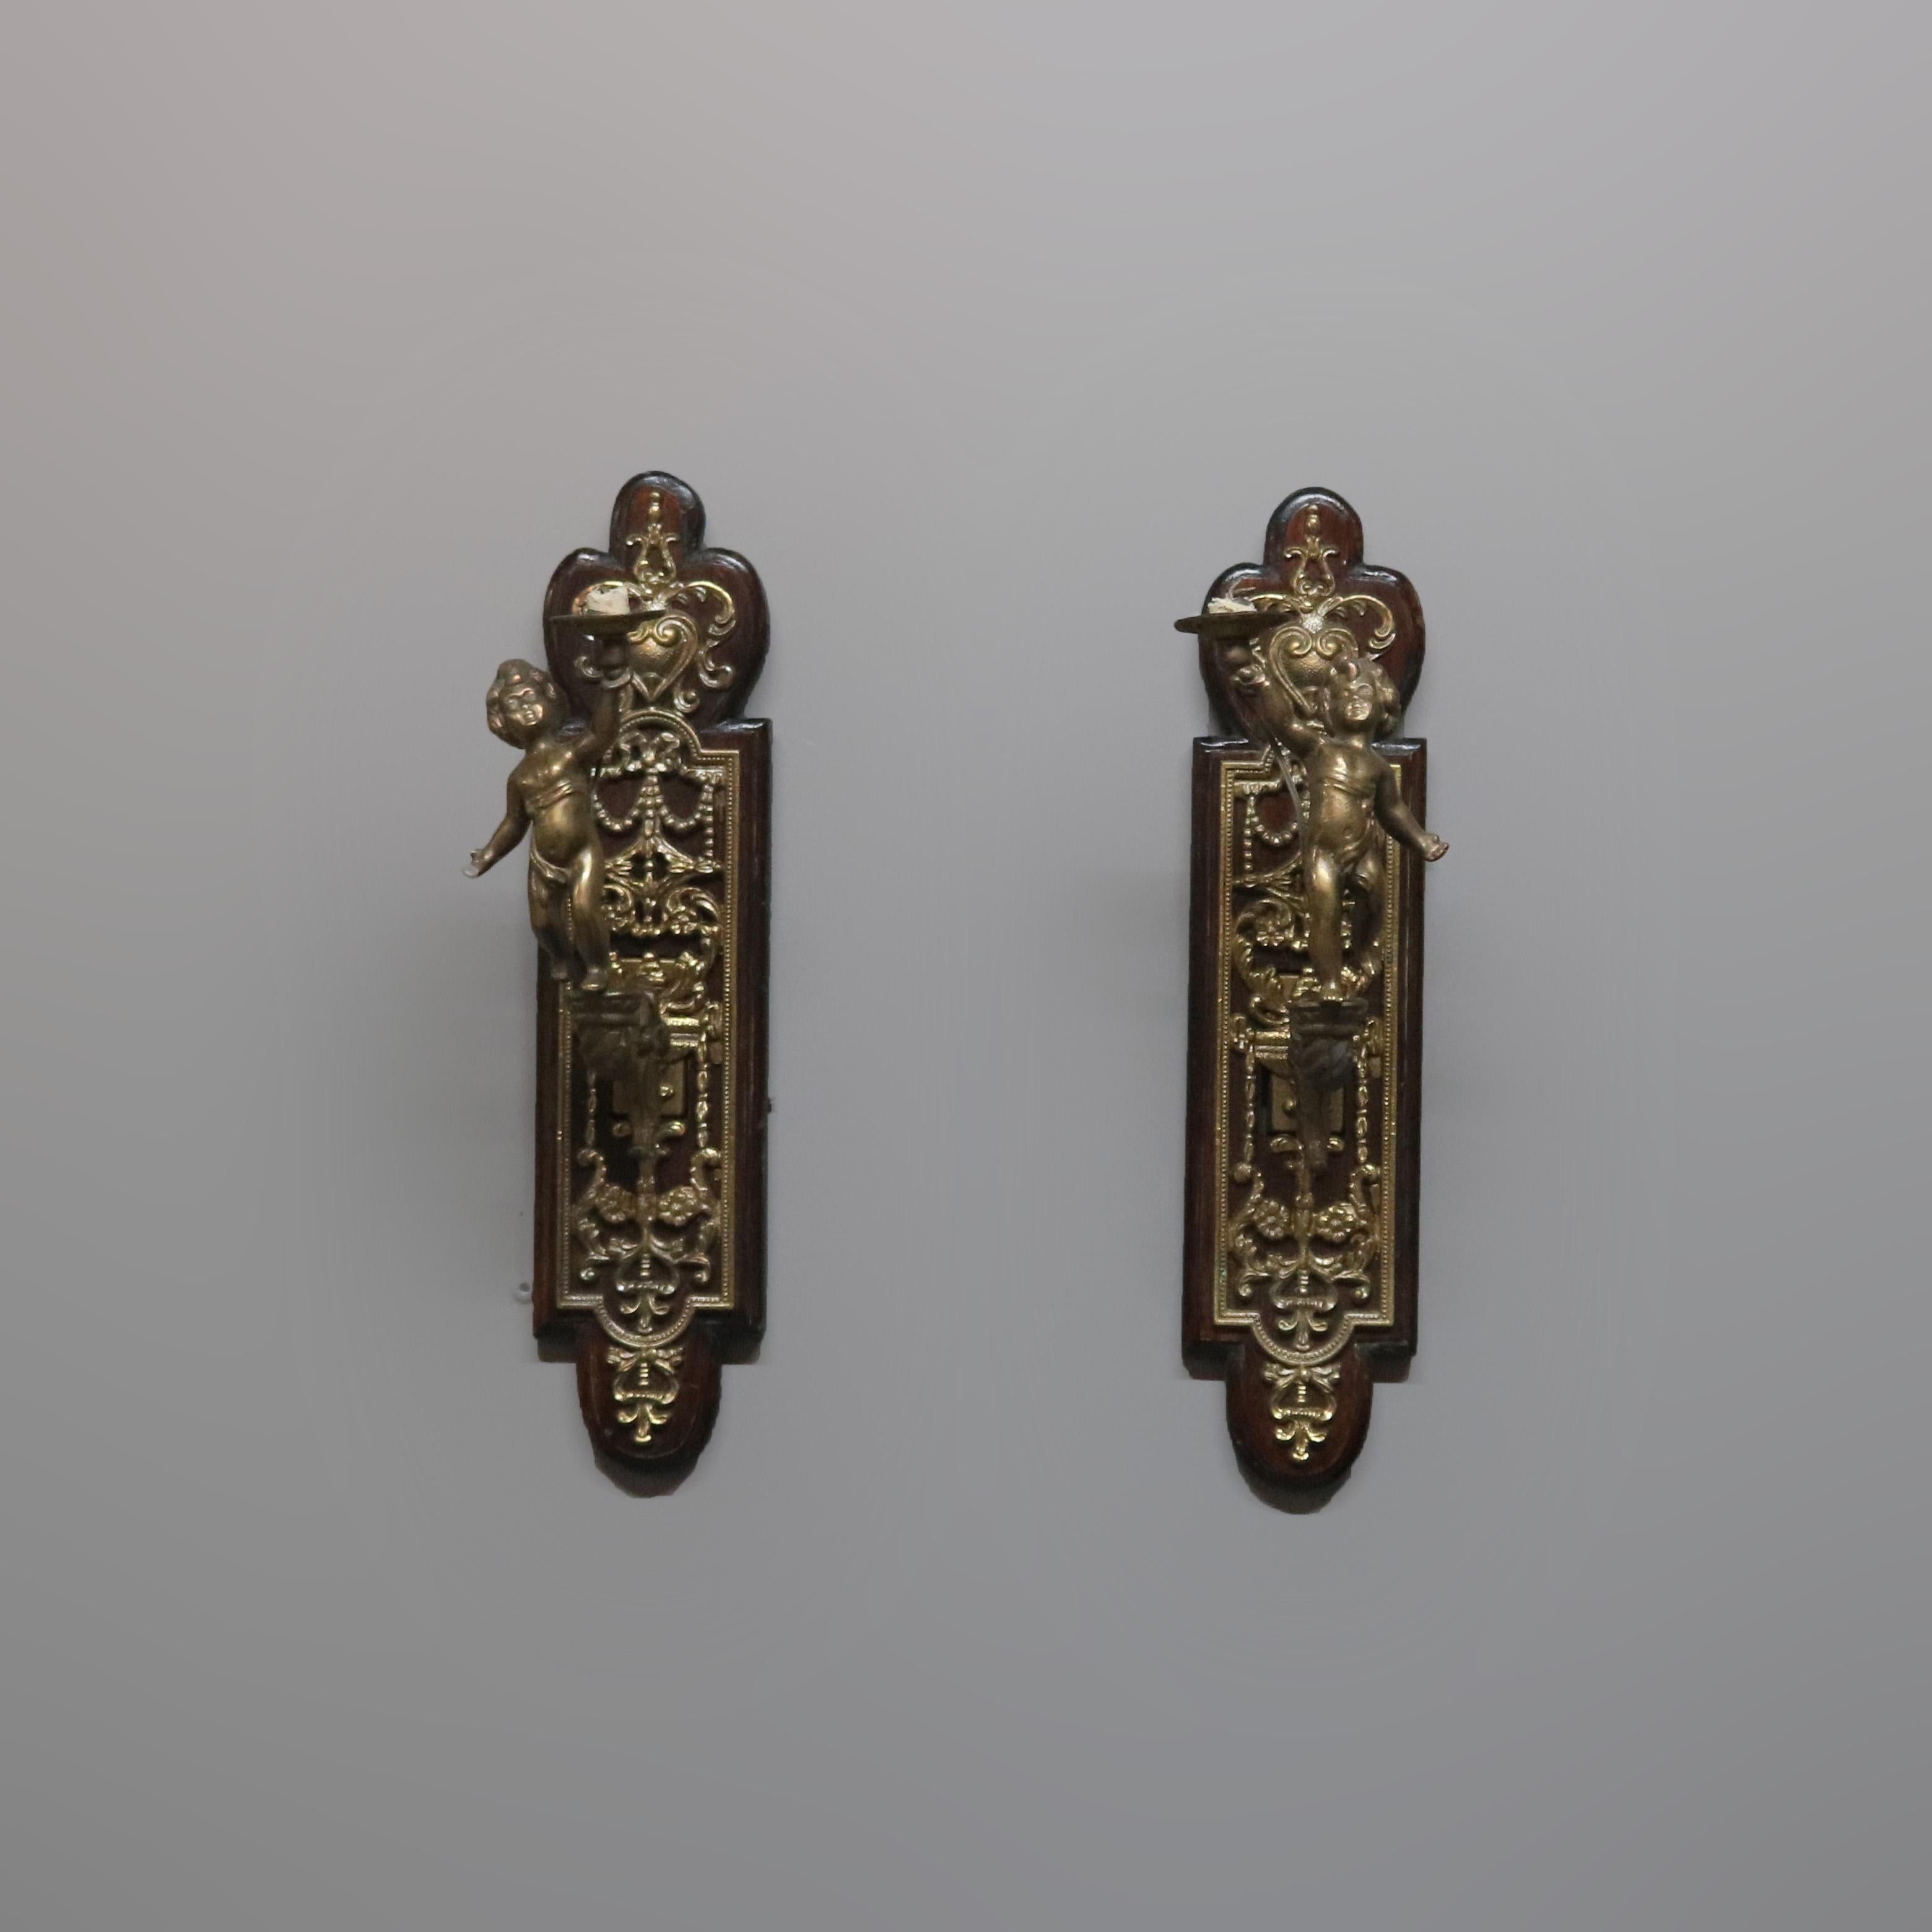 An antique pair of figural wall sconces offer shaped mahogany wall plates with cast and gilt metal cherub form arms terminating in candle lights, electrified, circa1900

 Measures: 6.25